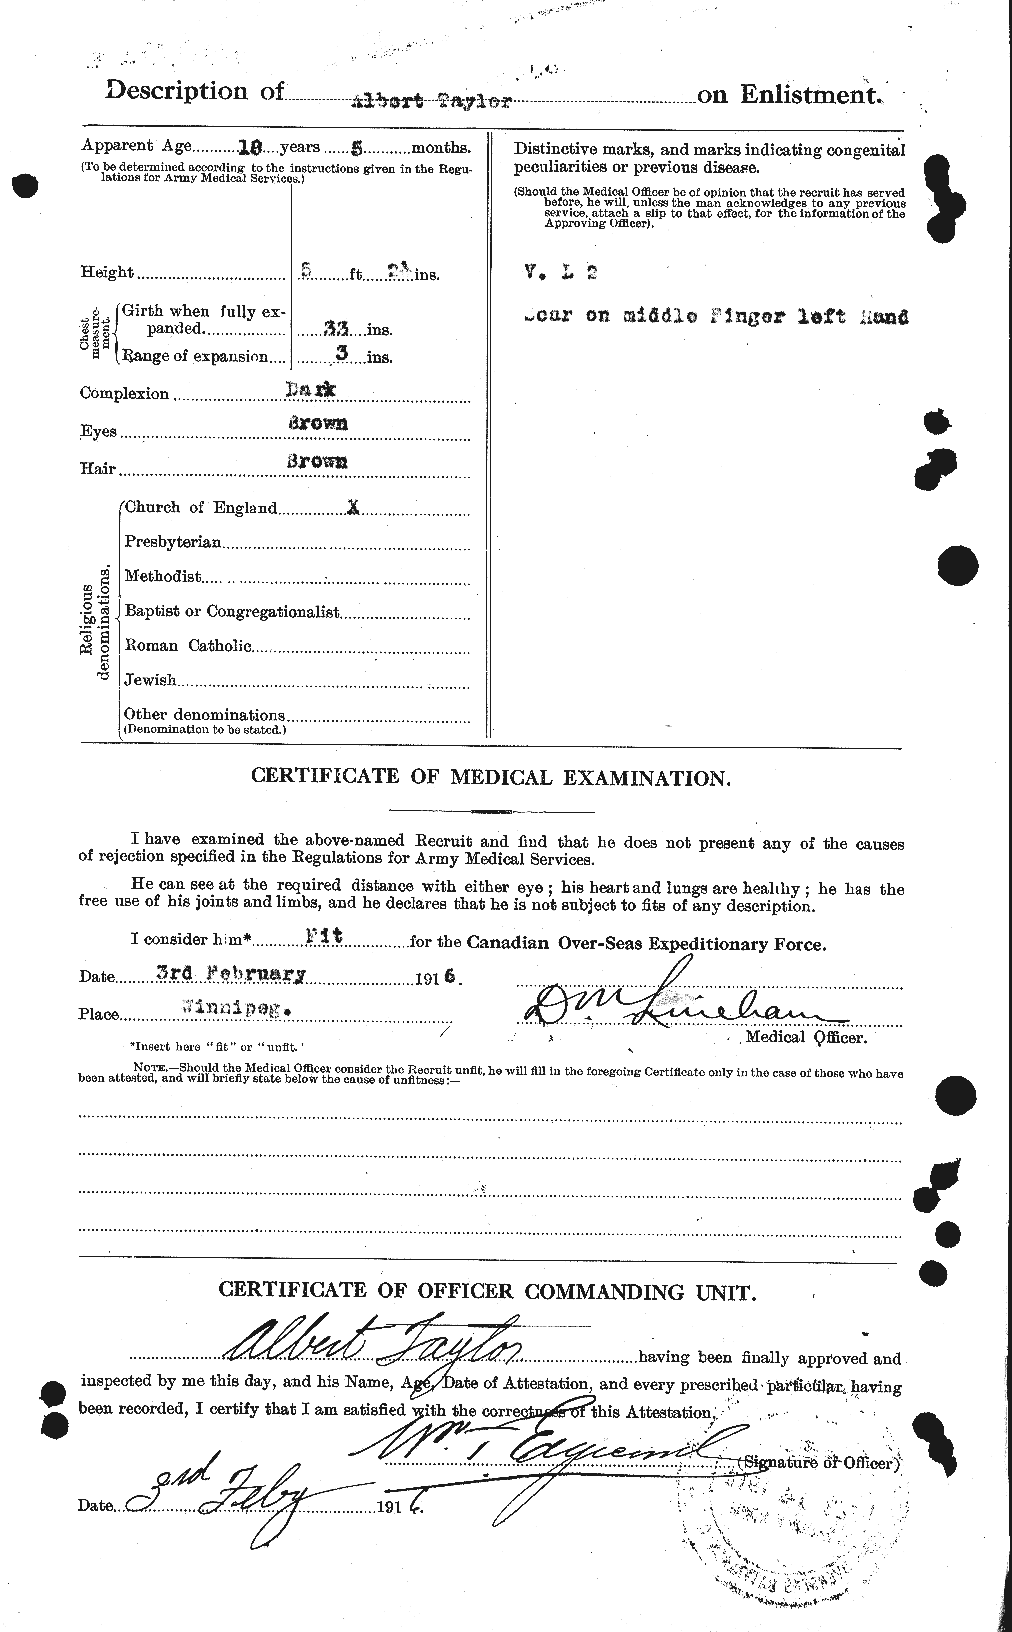 Personnel Records of the First World War - CEF 626080b